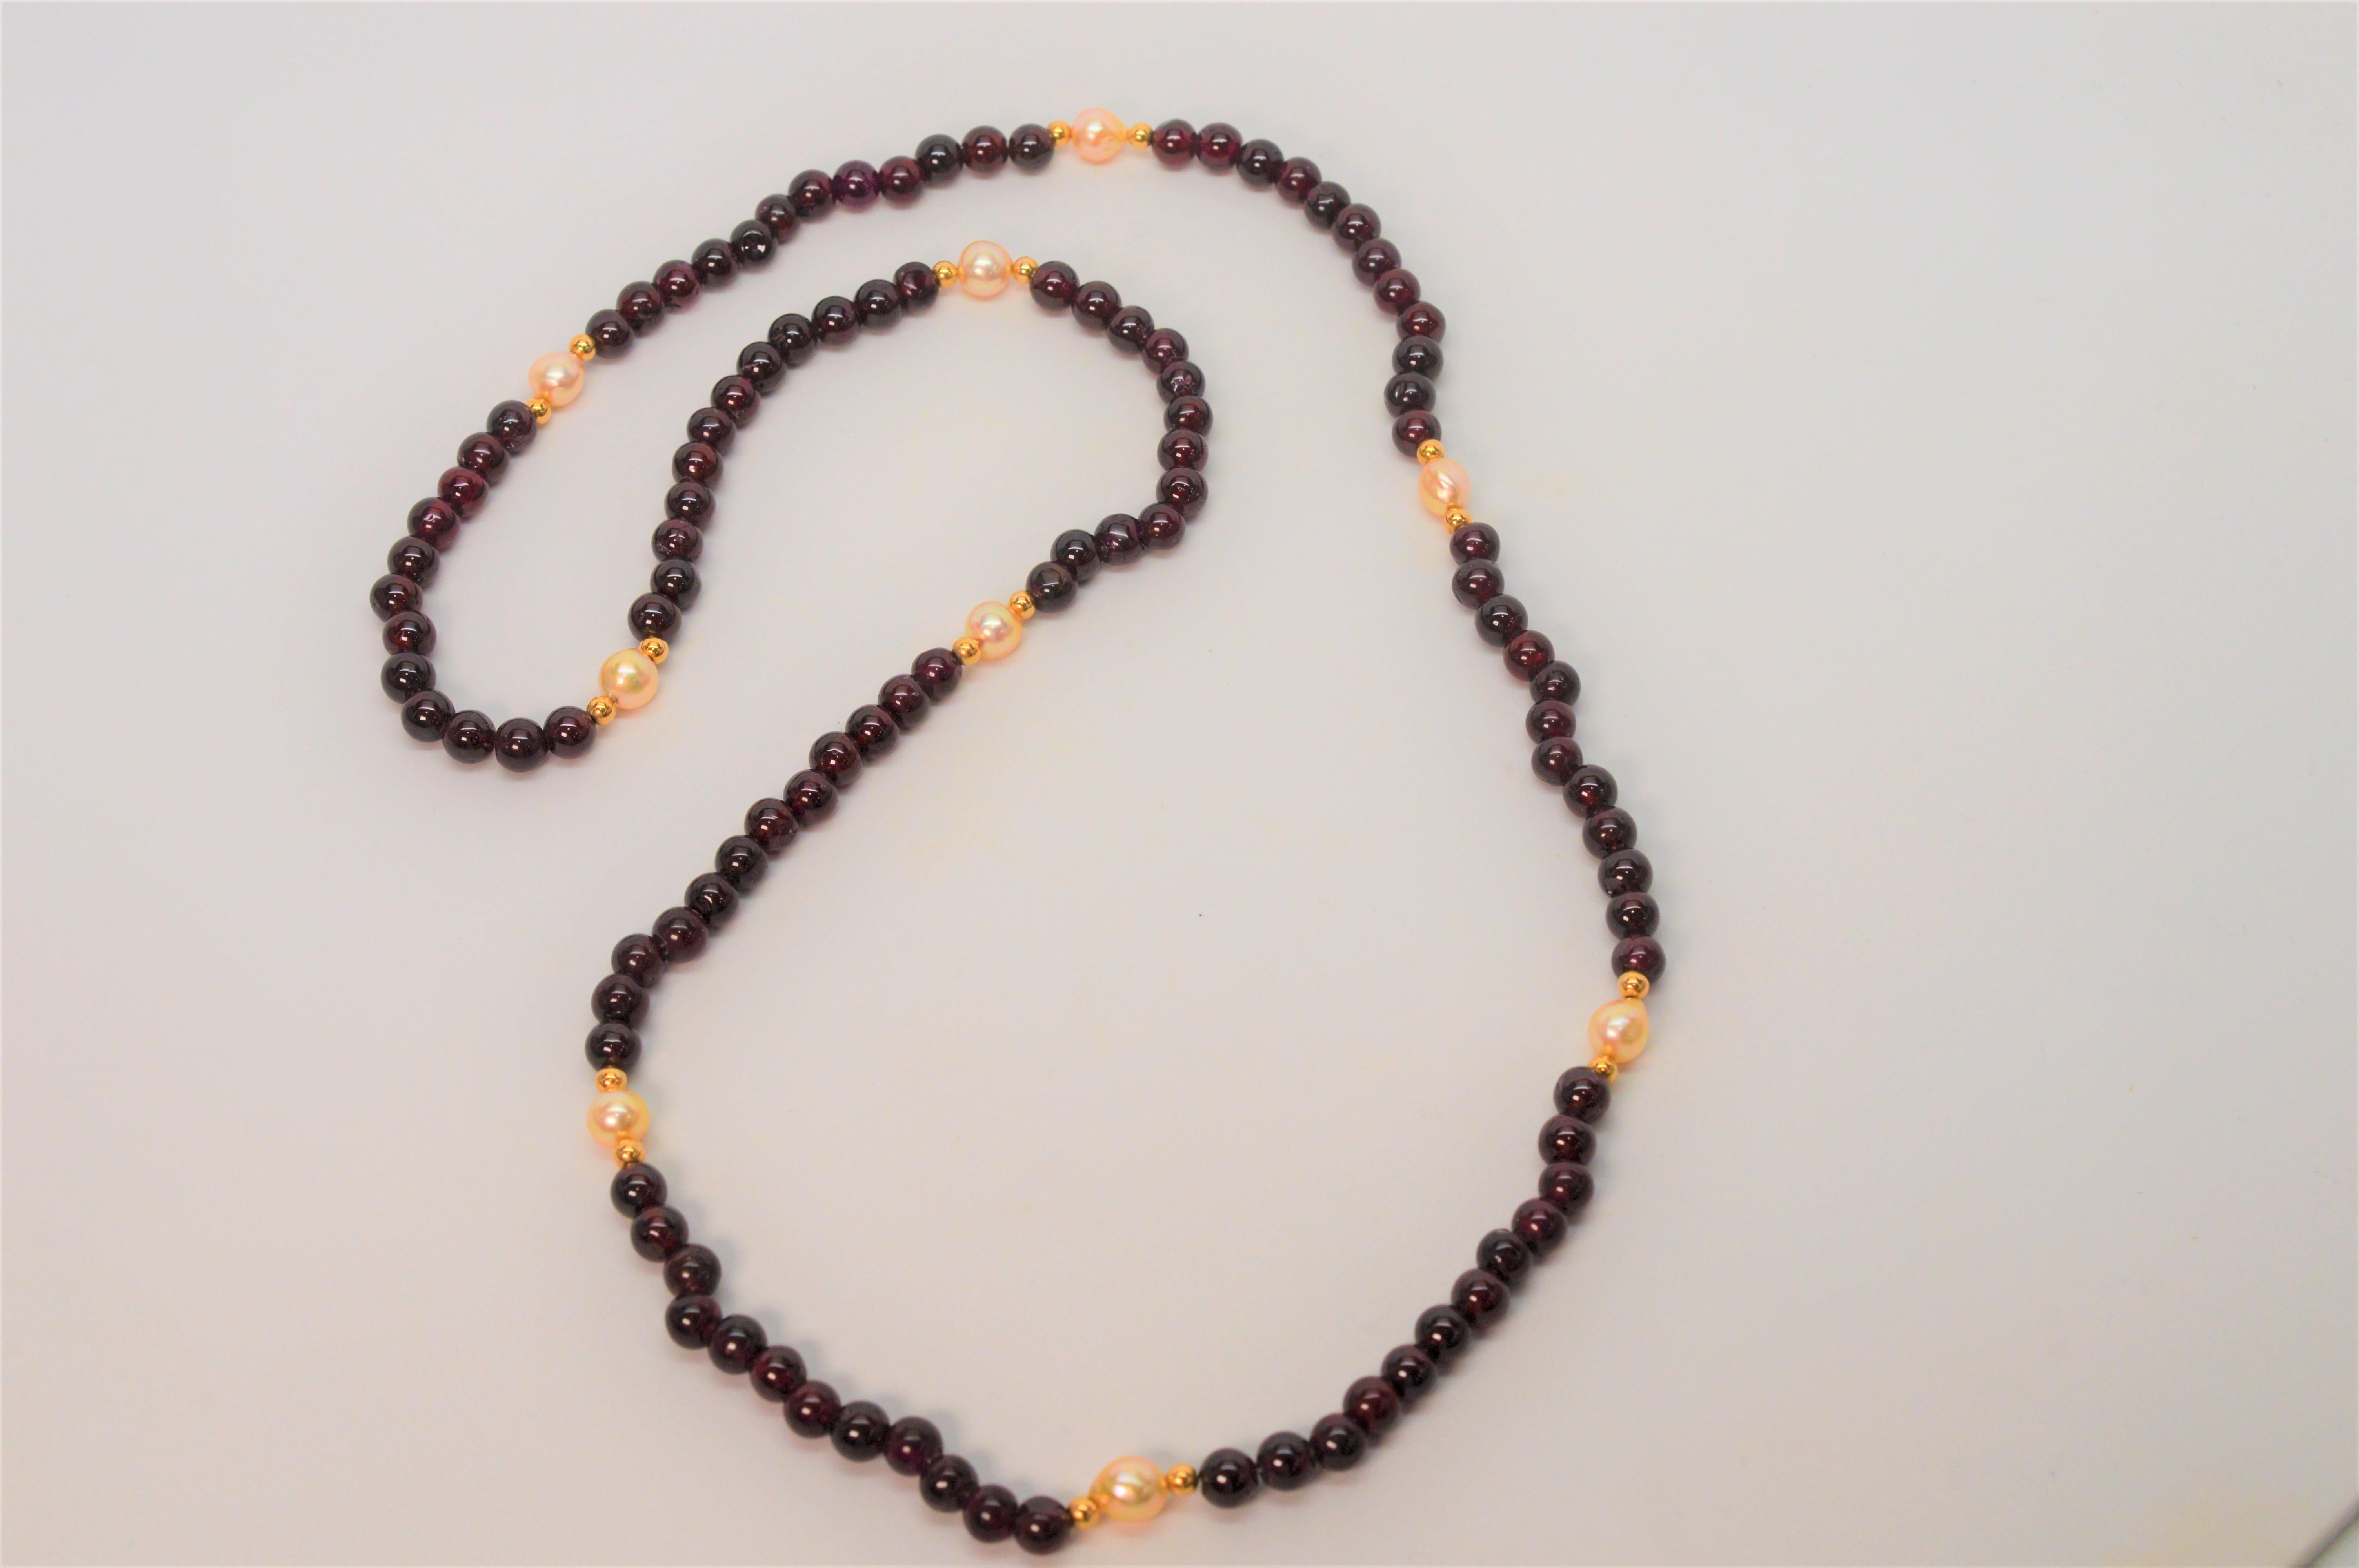 This spiritual stone of higher thinking and strength, these rich dark red garnet beads are strung with complimenting 14 karat yellow gold beads and genuine natural pearls create this colorful piece. The necklace measures 32 inches and is slip-over